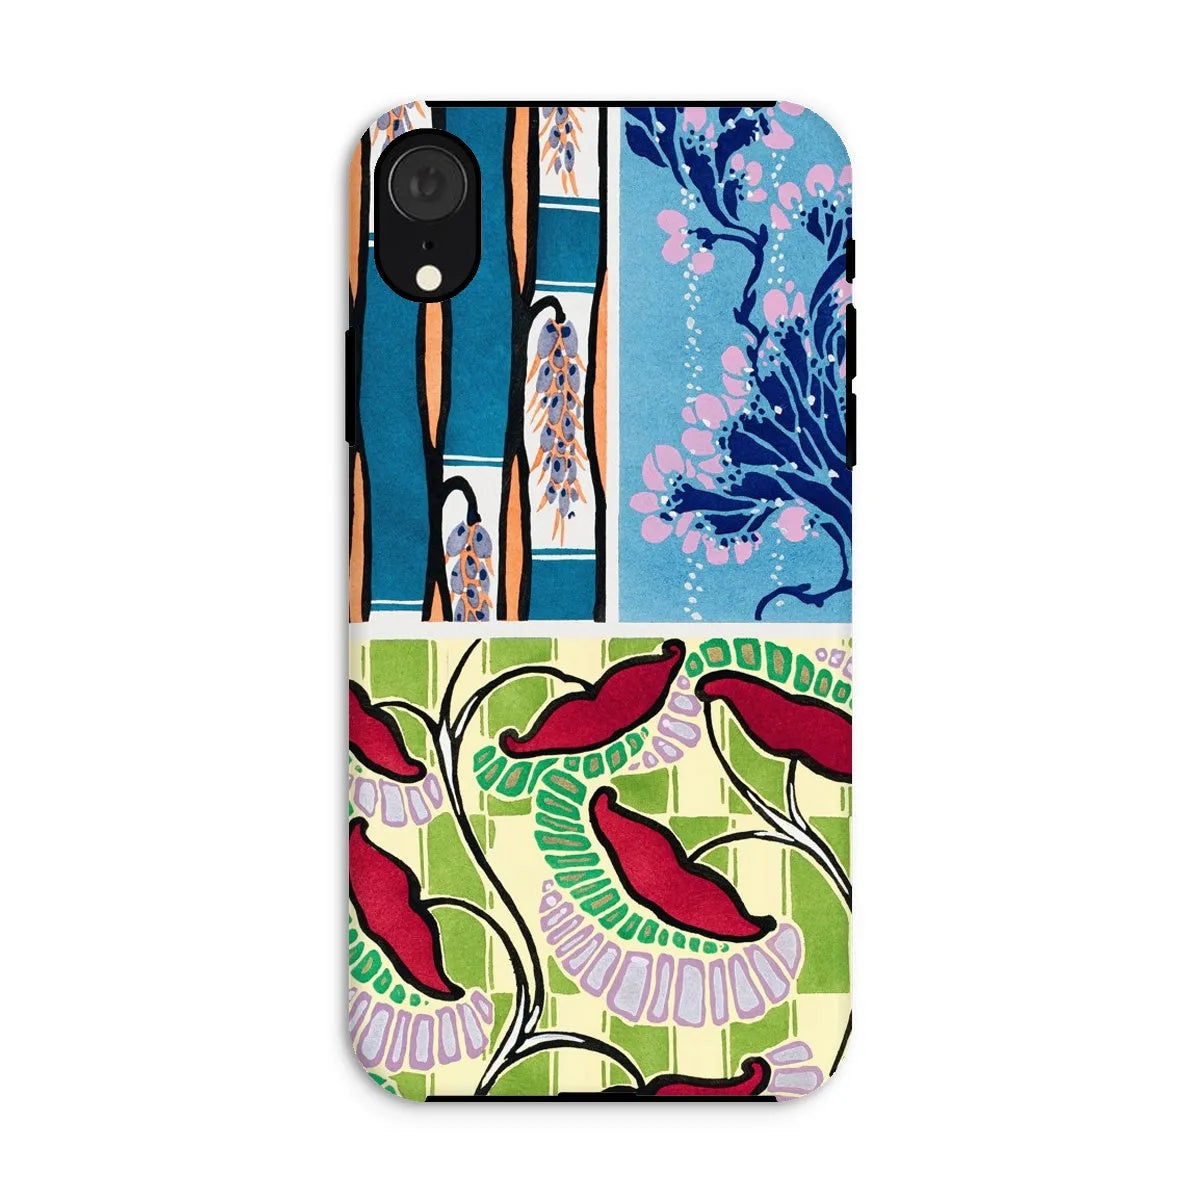 Floral Kitsch Aesthetic Art Phone Case - E.a. Séguy - Iphone Xr / Matte - Mobile Phone Cases - Aesthetic Art